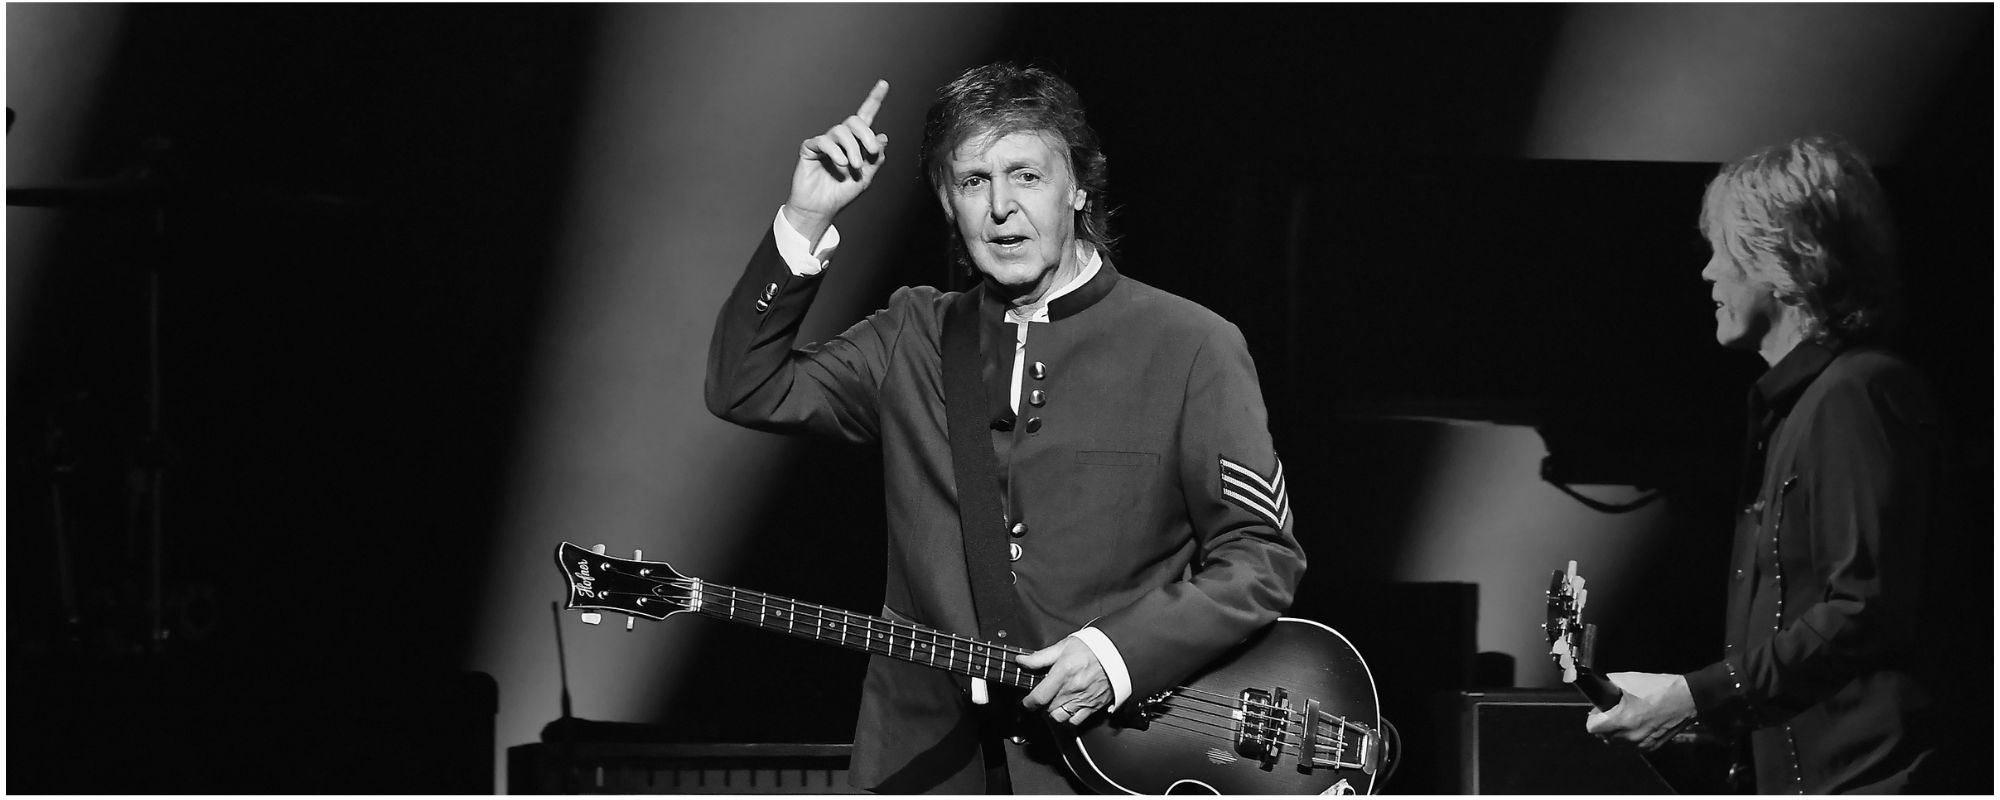 5 Classic Paul McCartney Songs That Are Still Relevant Today